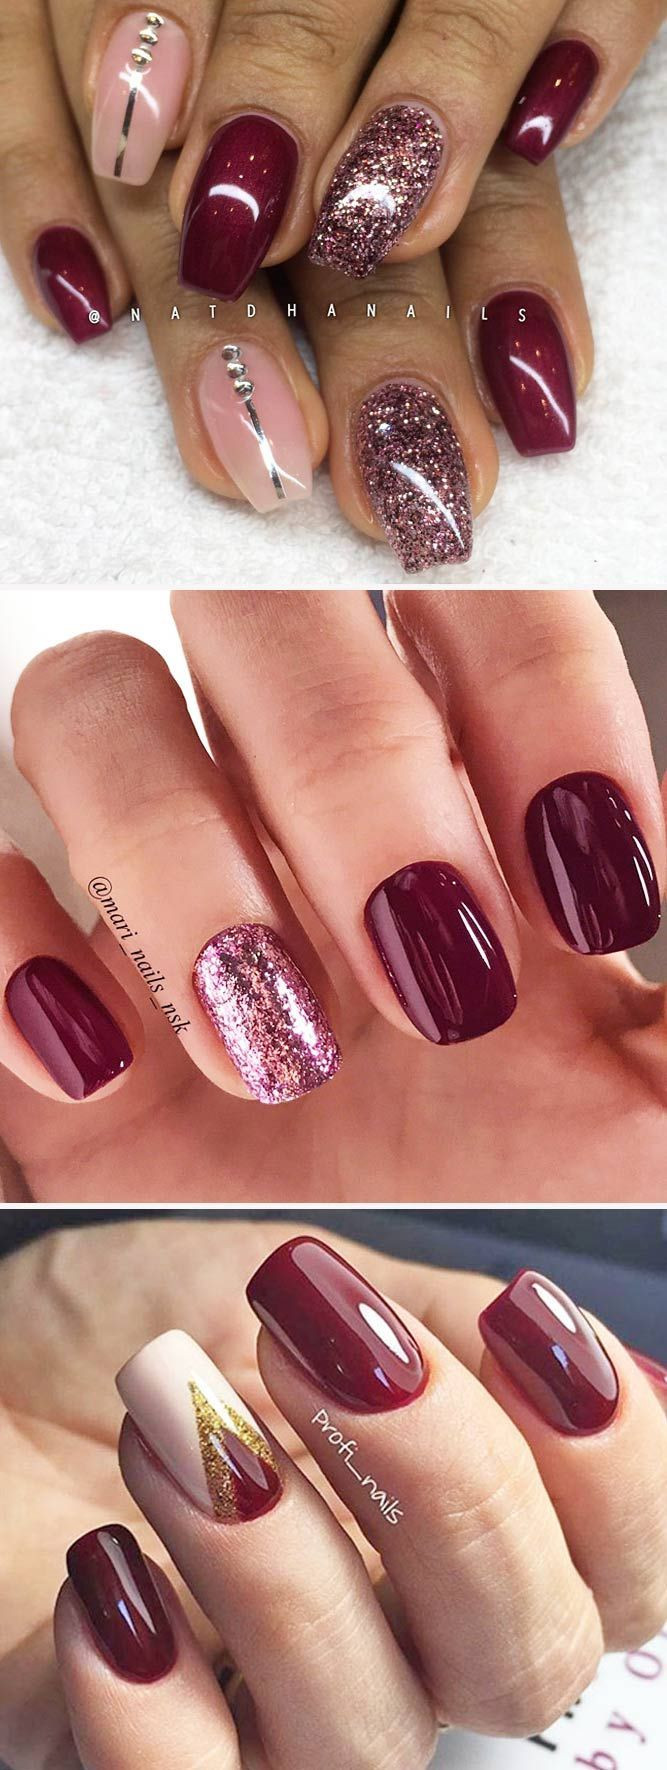 Sns Nail Designs 2020
 45 Newest Burgundy Nails Designs You Should Definitely Try